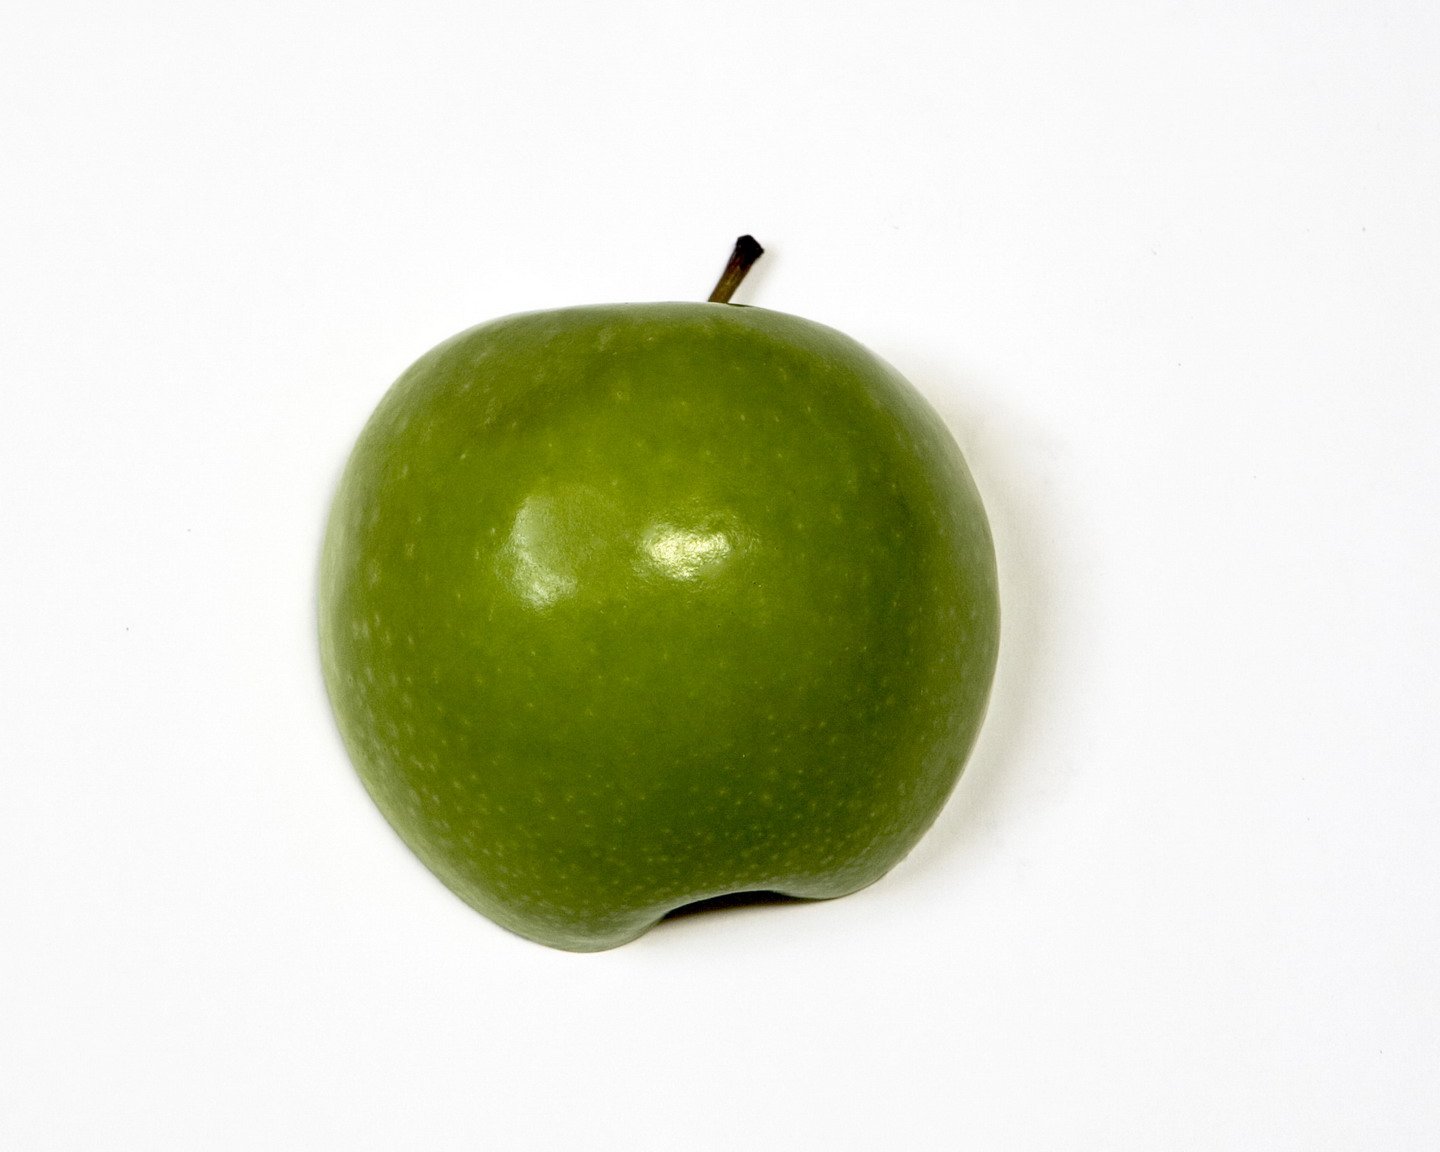 the green apple is against a white backdrop